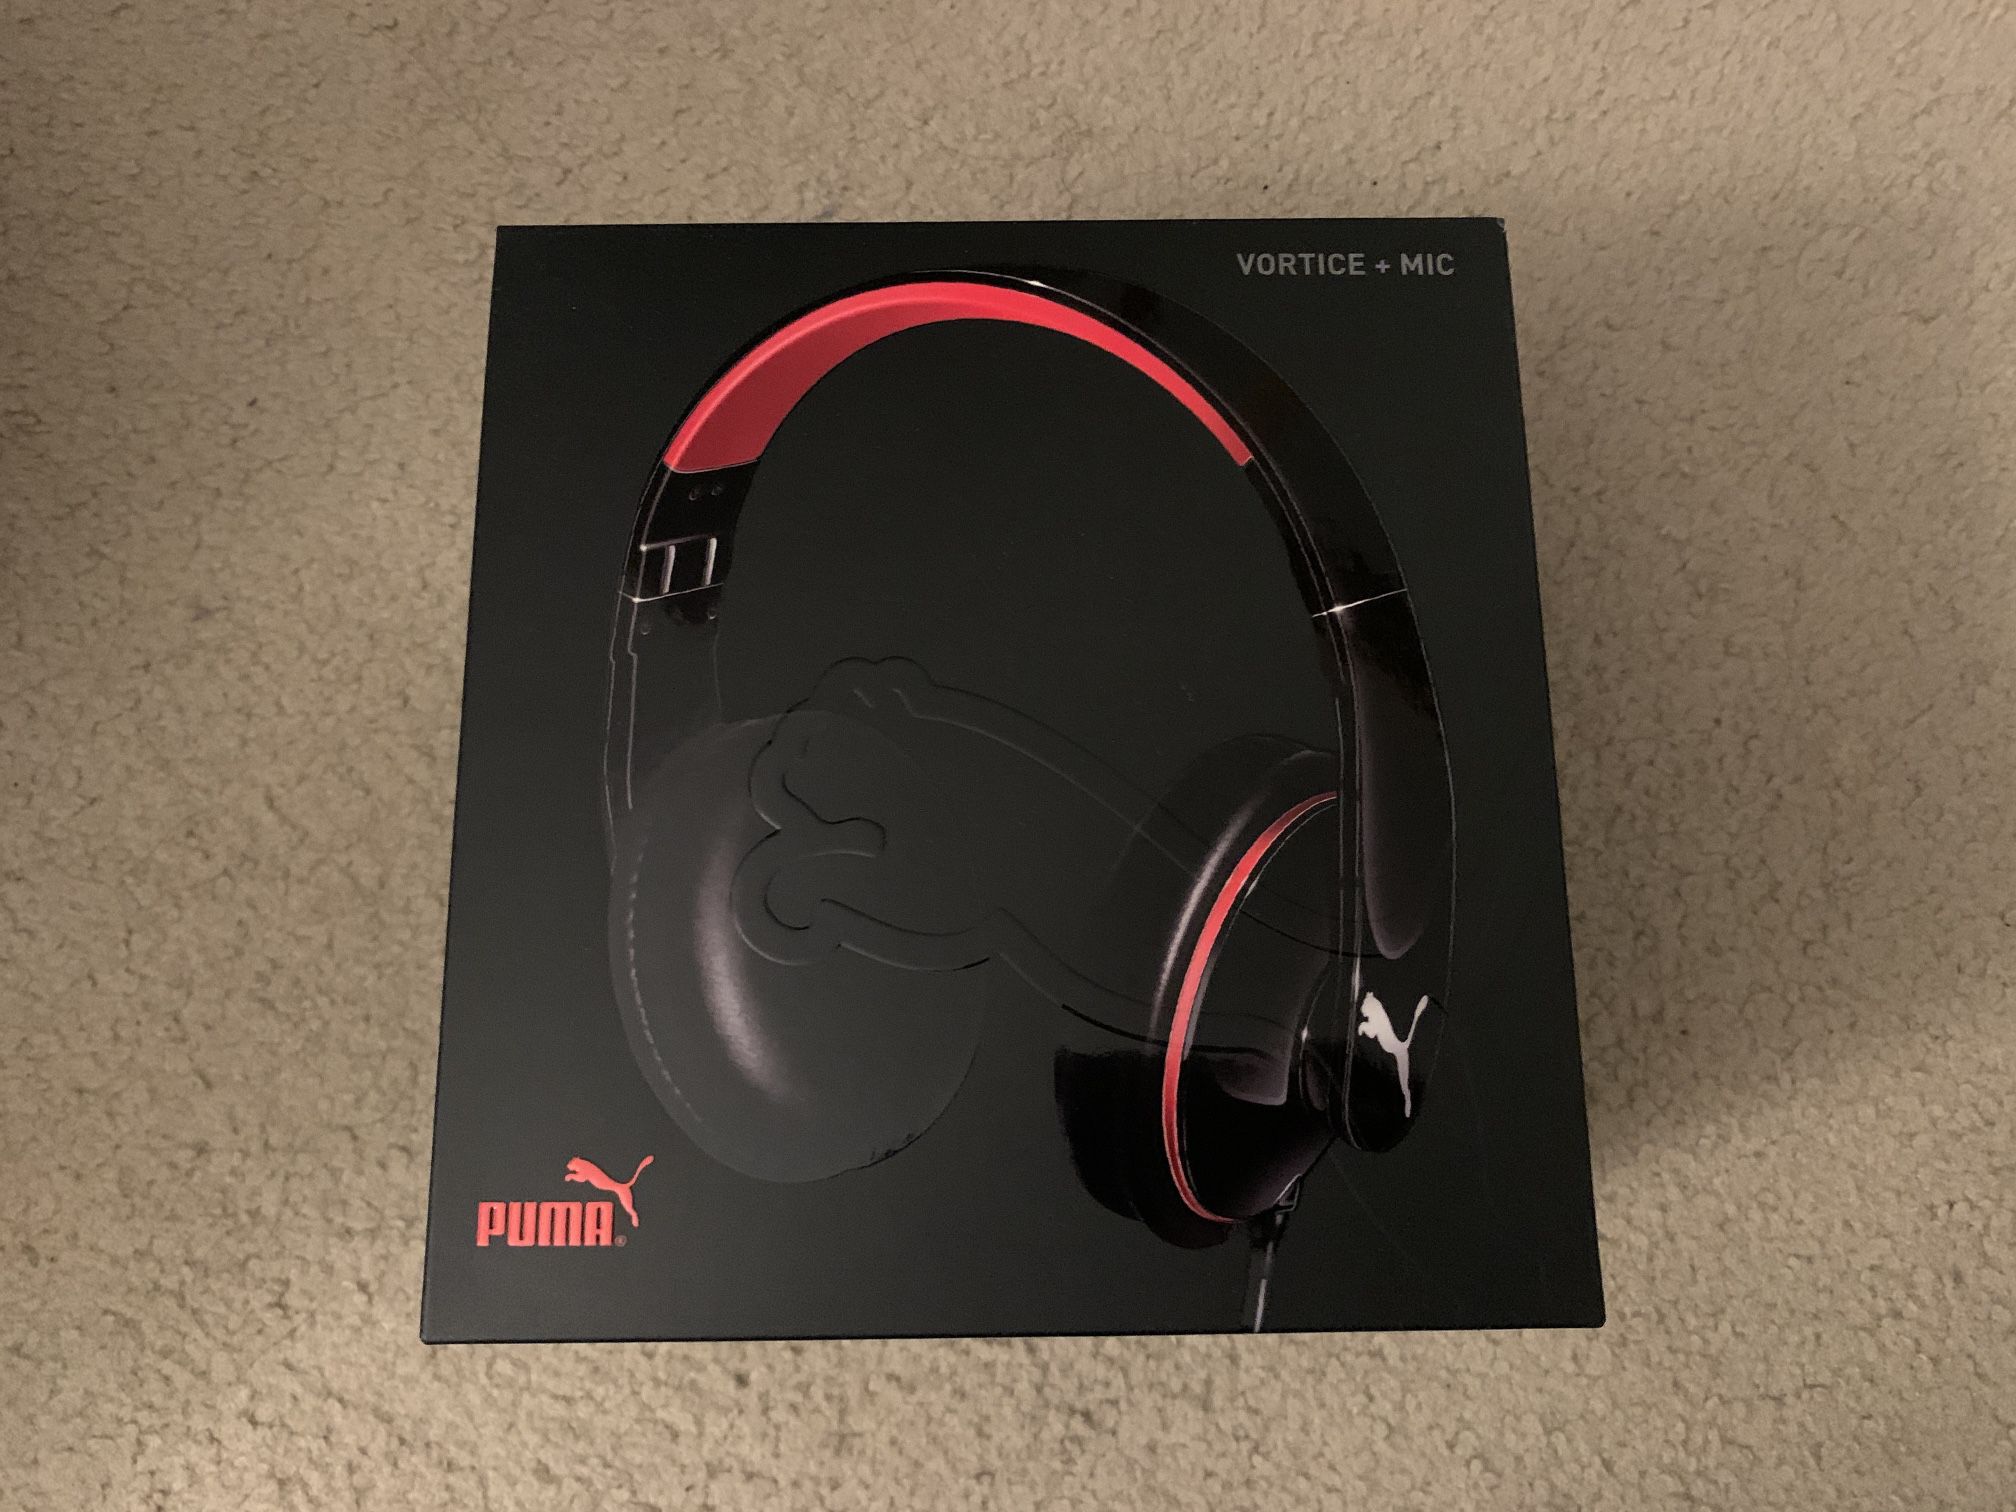 New Wired Puma Vortice Over Ear Headphone Headset And Mic  